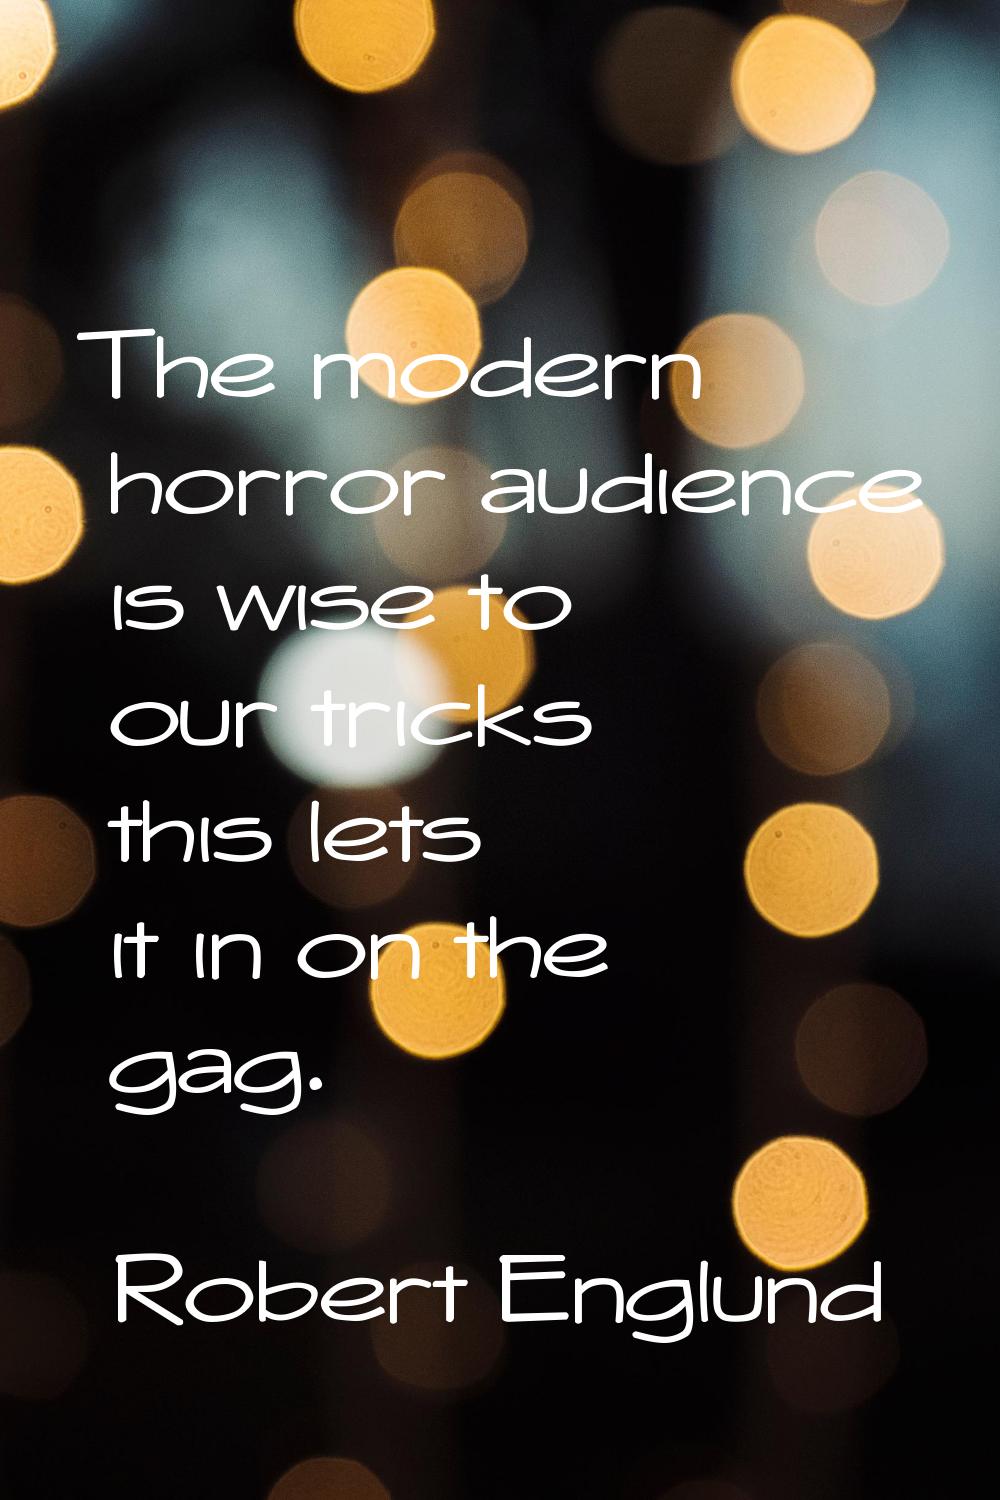 The modern horror audience is wise to our tricks this lets it in on the gag.